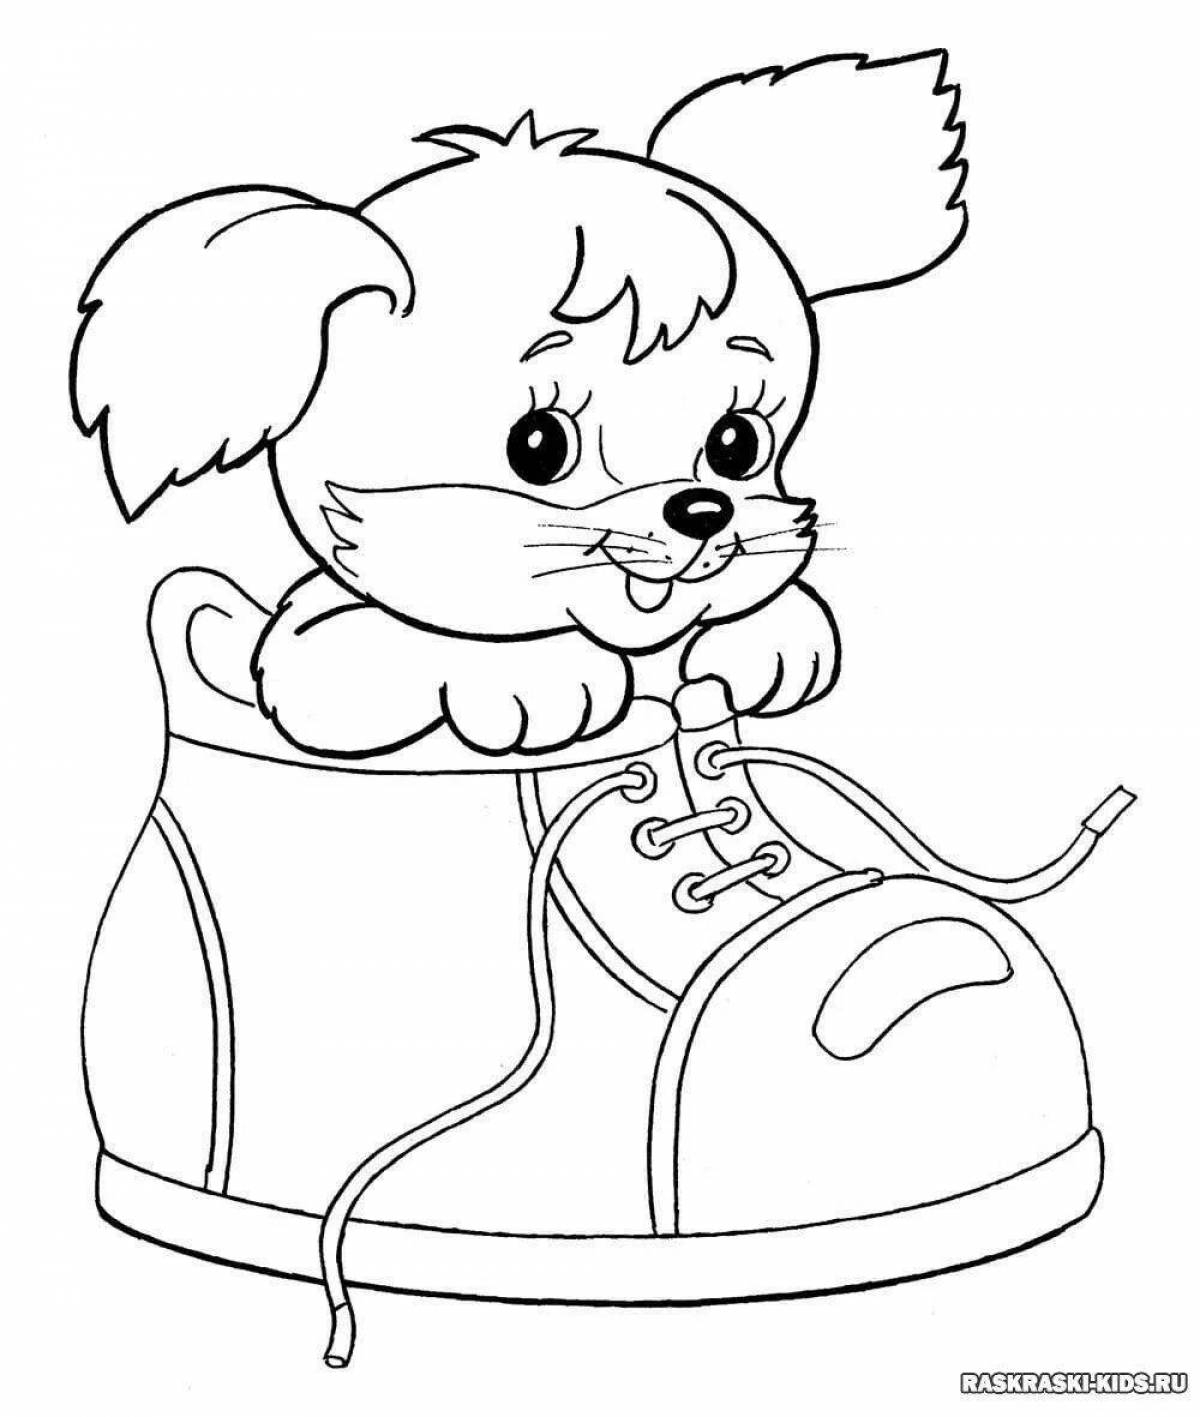 Bright coloring page 4 5